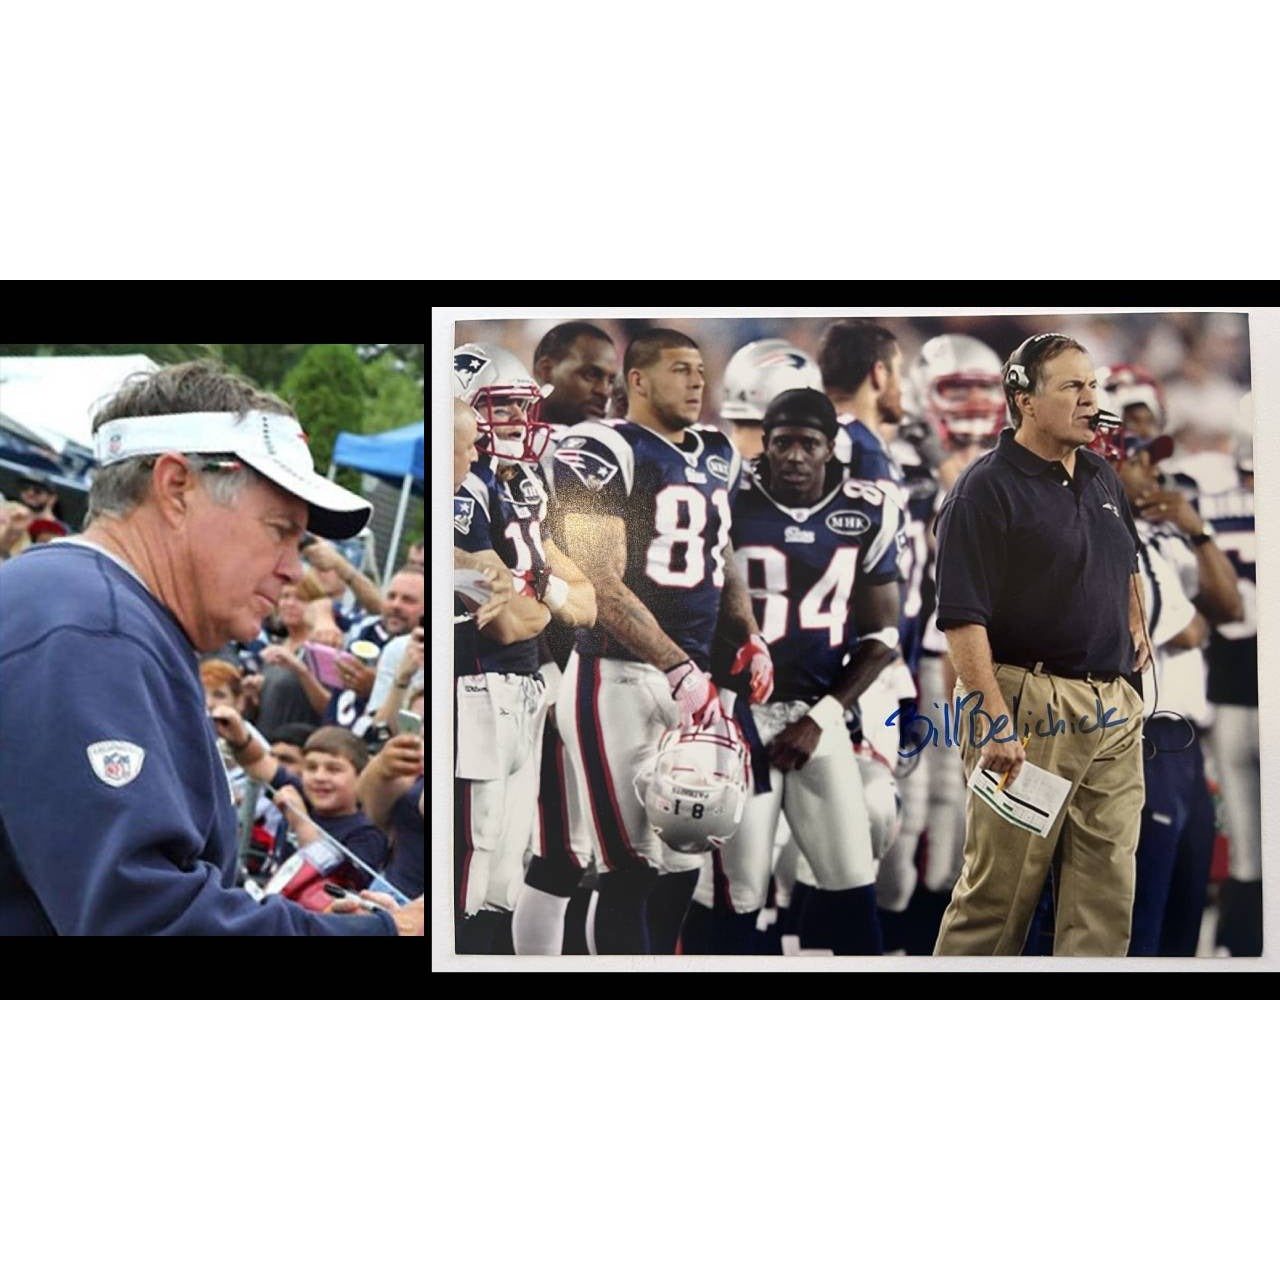 Bill Belichick and Tom Brady 16 x 20 New England Patriots photo signed with proof